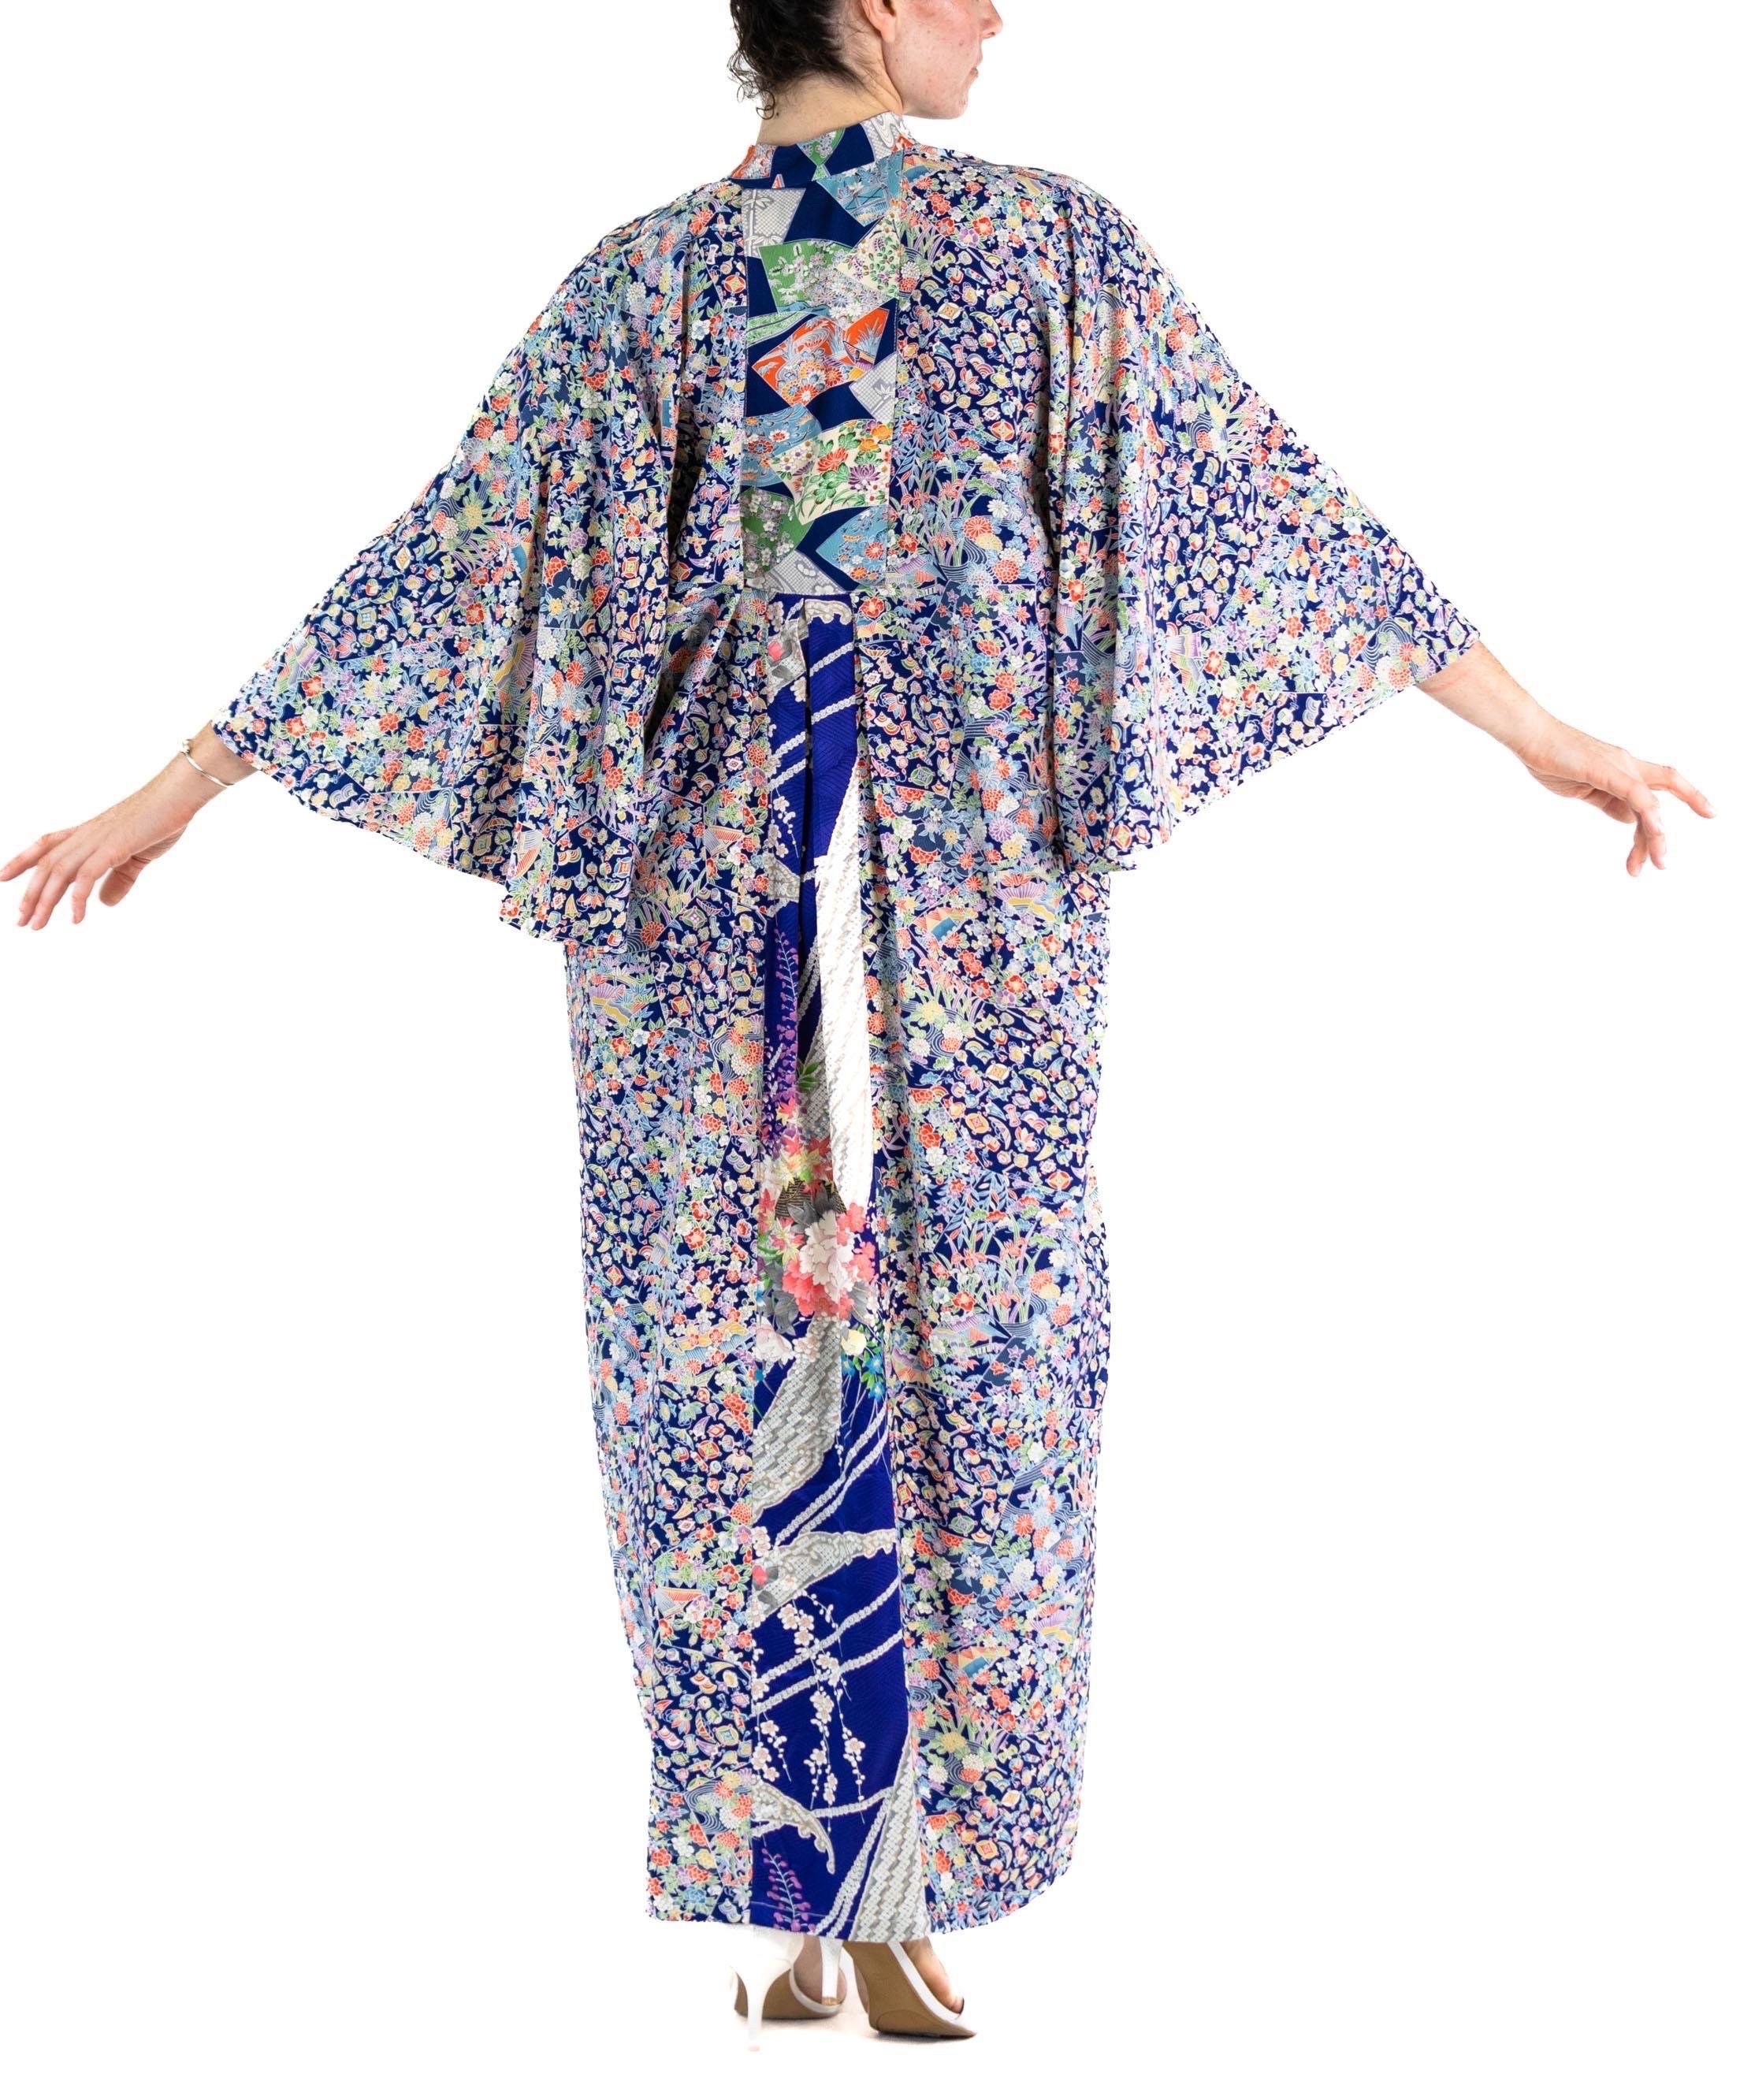 Each Morphew Collection kaftan is unique. Using our classic fitted/unfitted kaftan pattern we upcycle vintage kimono silks from the 1940s to the 1980s. Many are hand printed or dyed and some even have touches of hand embroidery or touches of